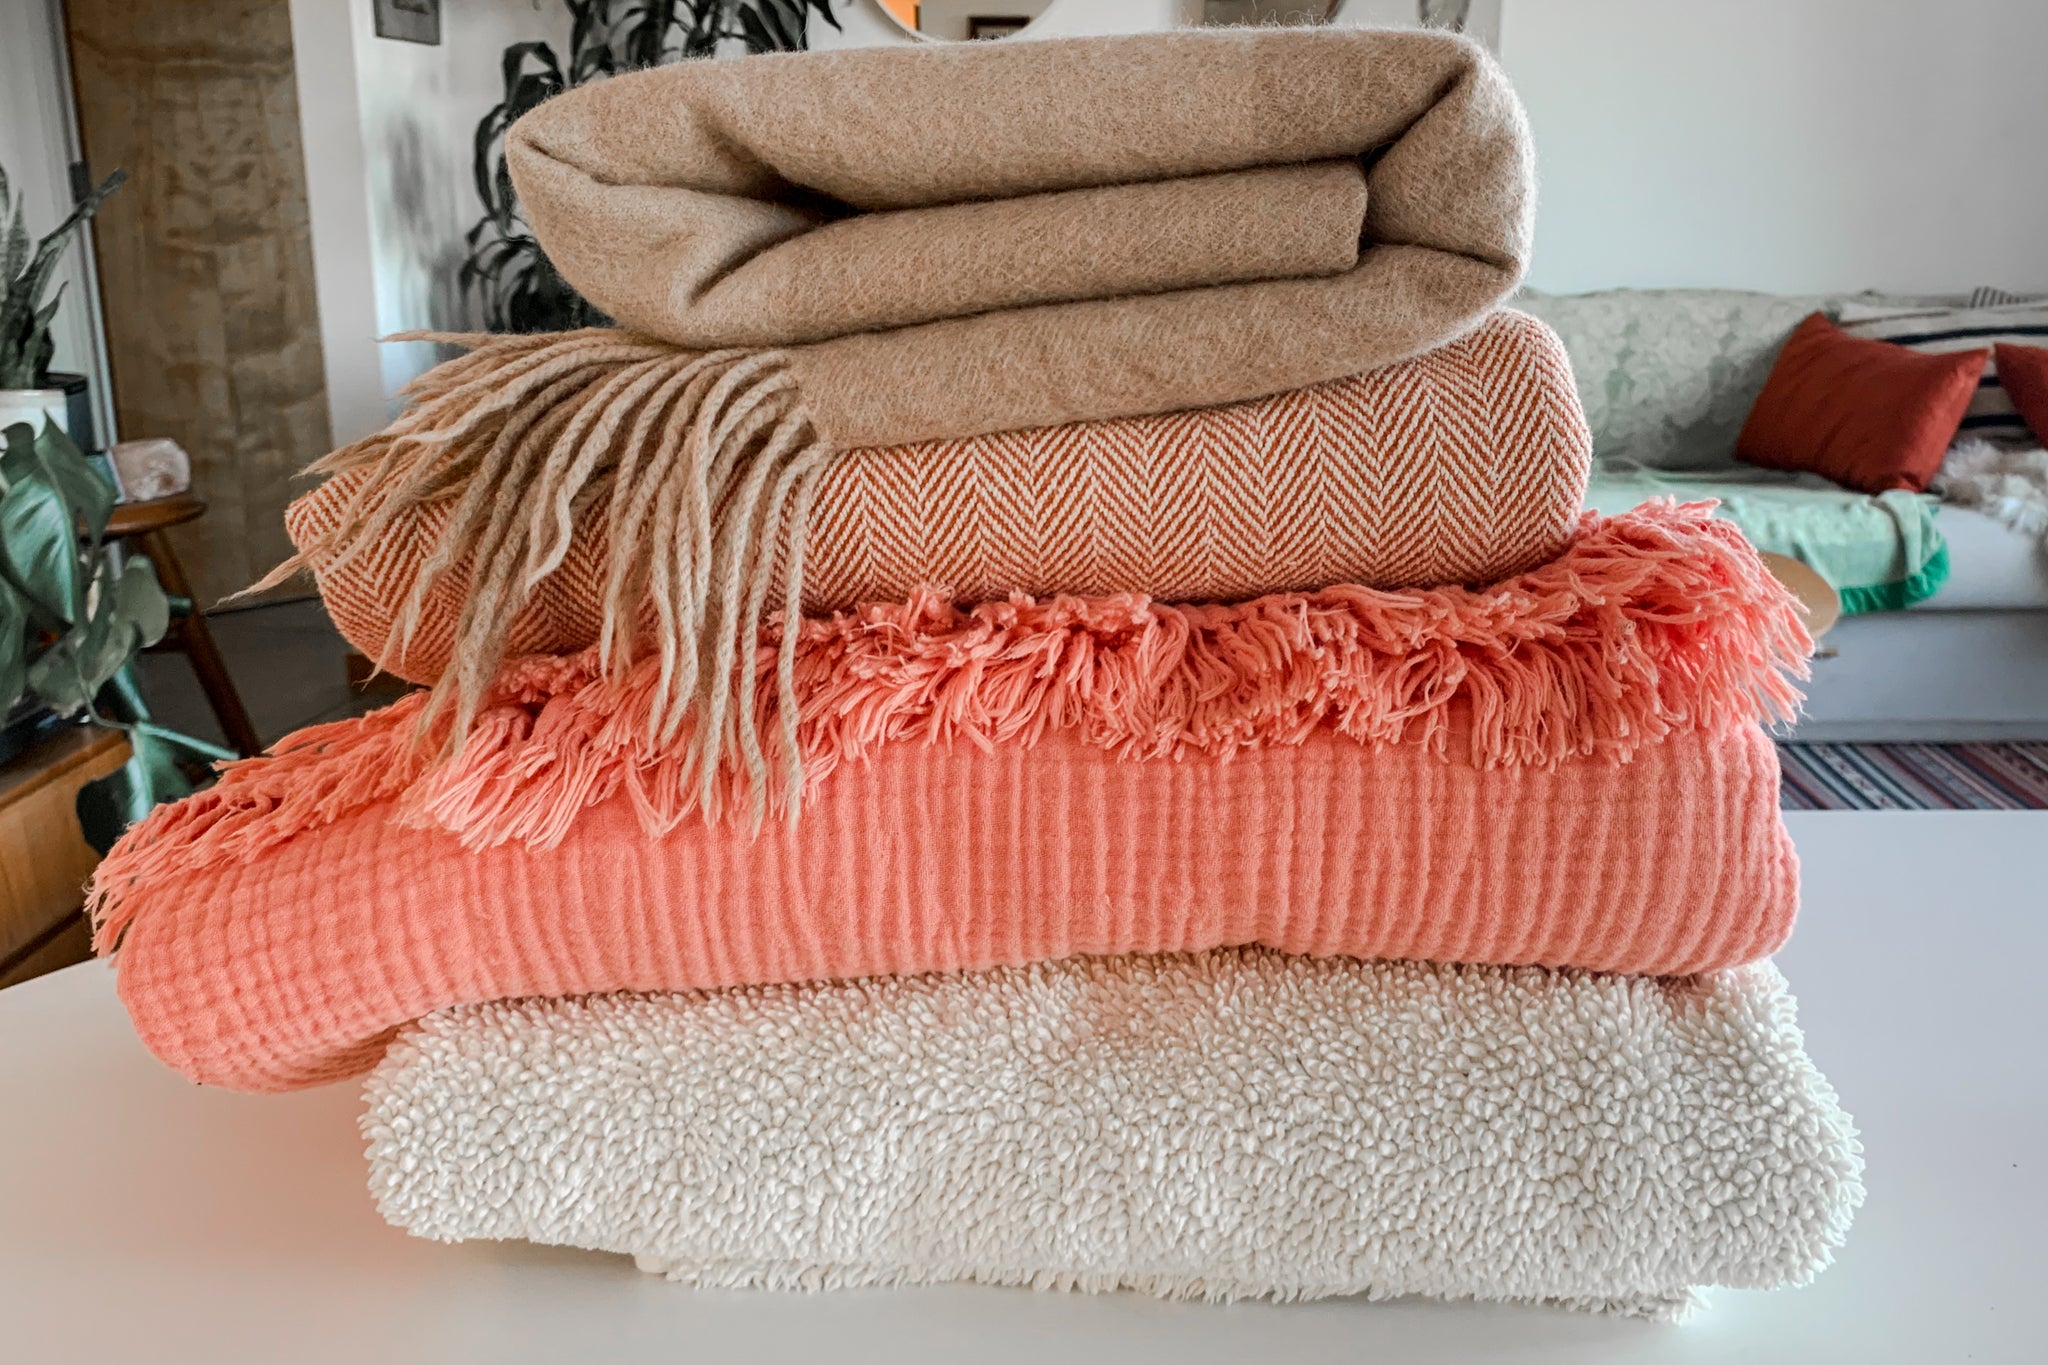 How to wash fleece – and keep throws and blankets hygienic